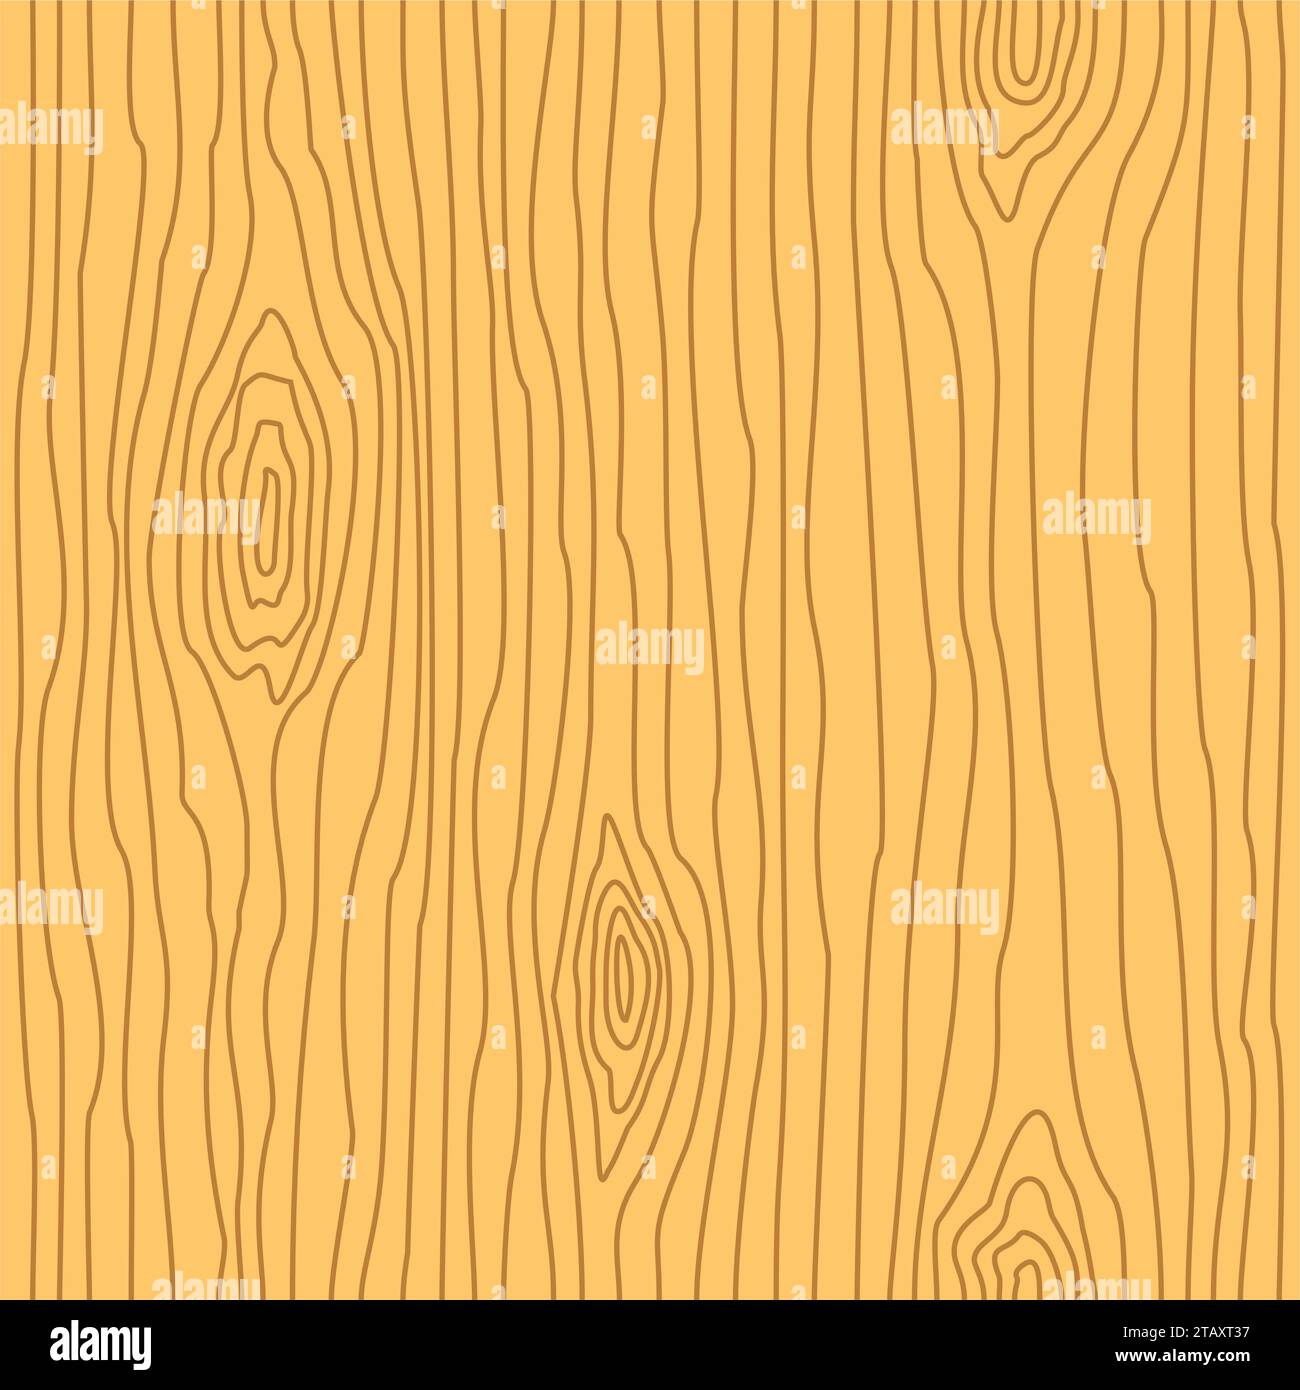 Wood grain texture. Seamless wooden pattern. Abstract line background. Vector illustration Stock Vector